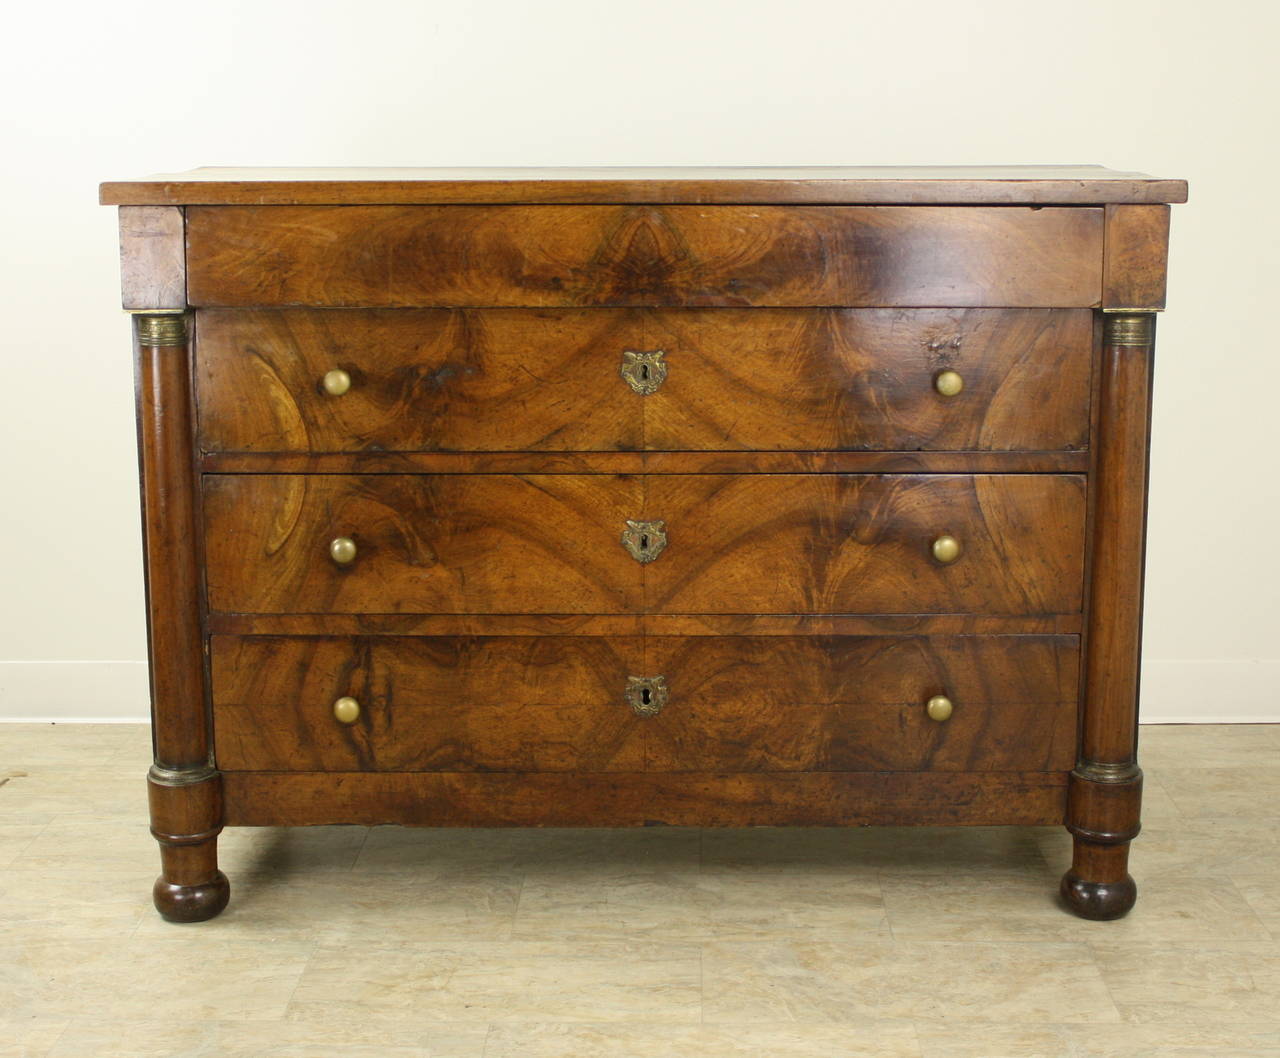 Very classical dramatic French period bureau. Beautiful bookmatched veneer in a warm well-grained walnut. The wood top has a very attractive look. Formal, but with the wooden top, it is suitable for a well-decorated home, and is not over-the-top in